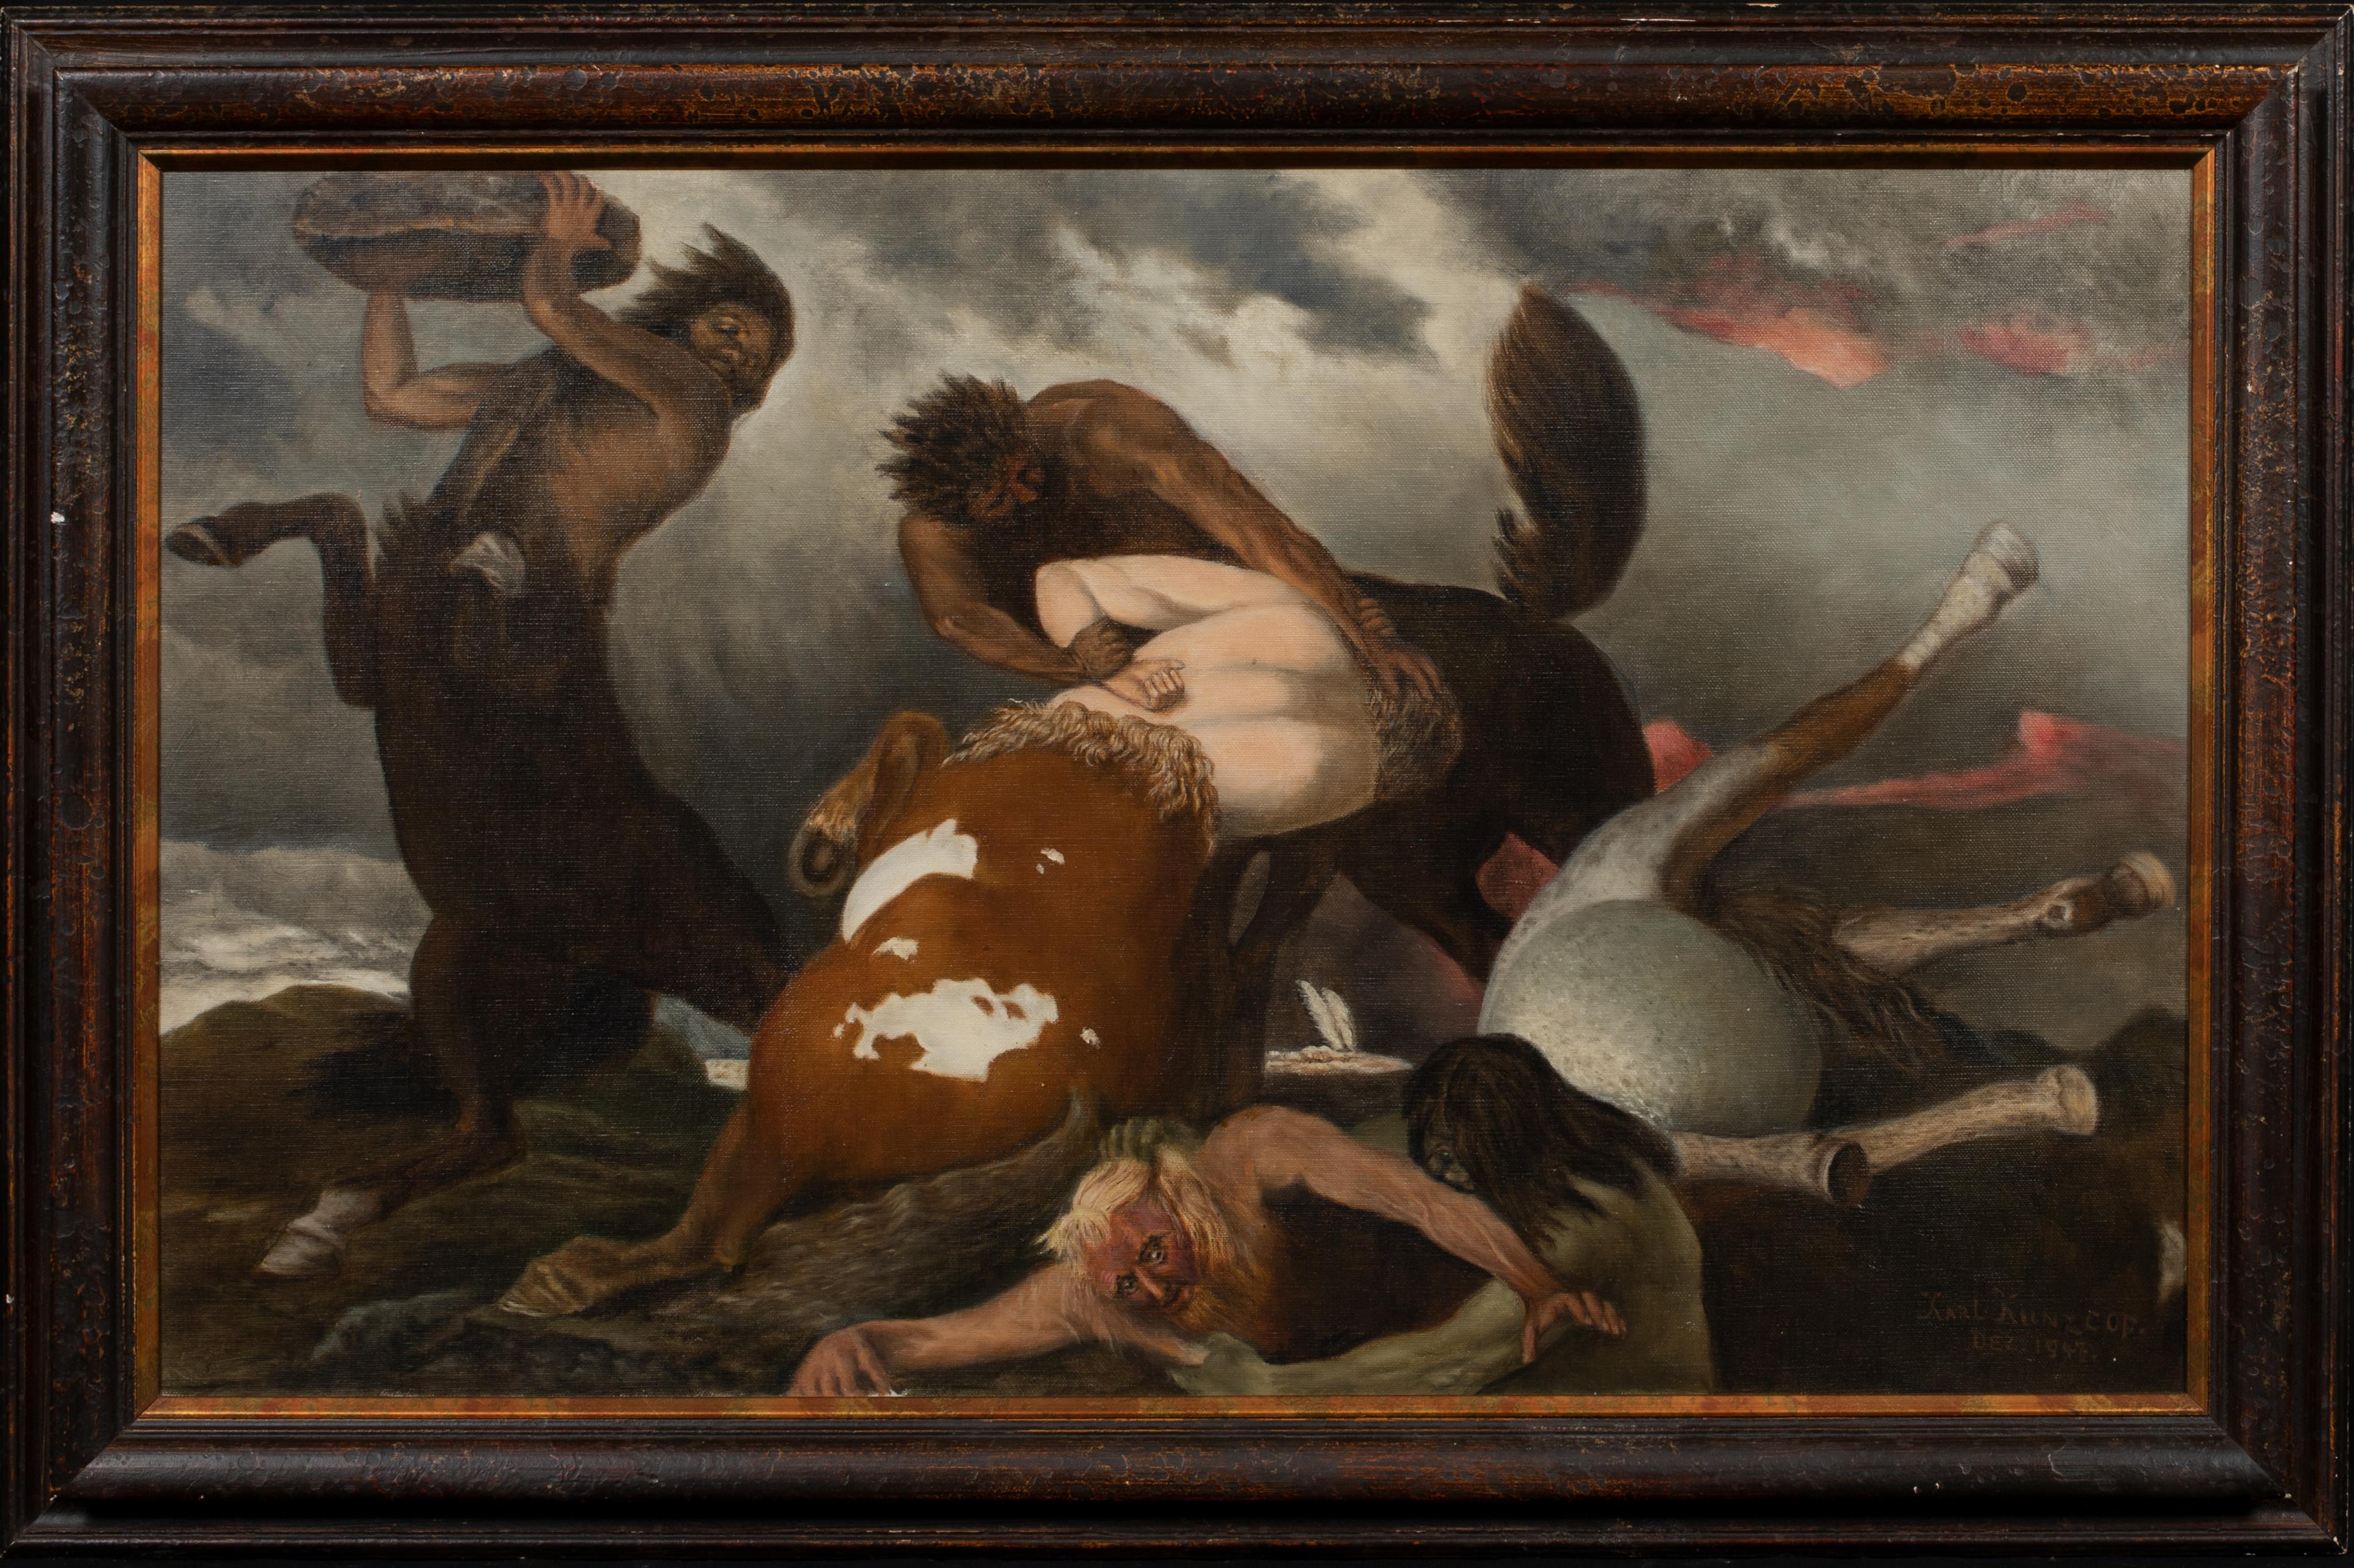 Unknown Portrait Painting - Battle Of the Centaurs, early 20th century 